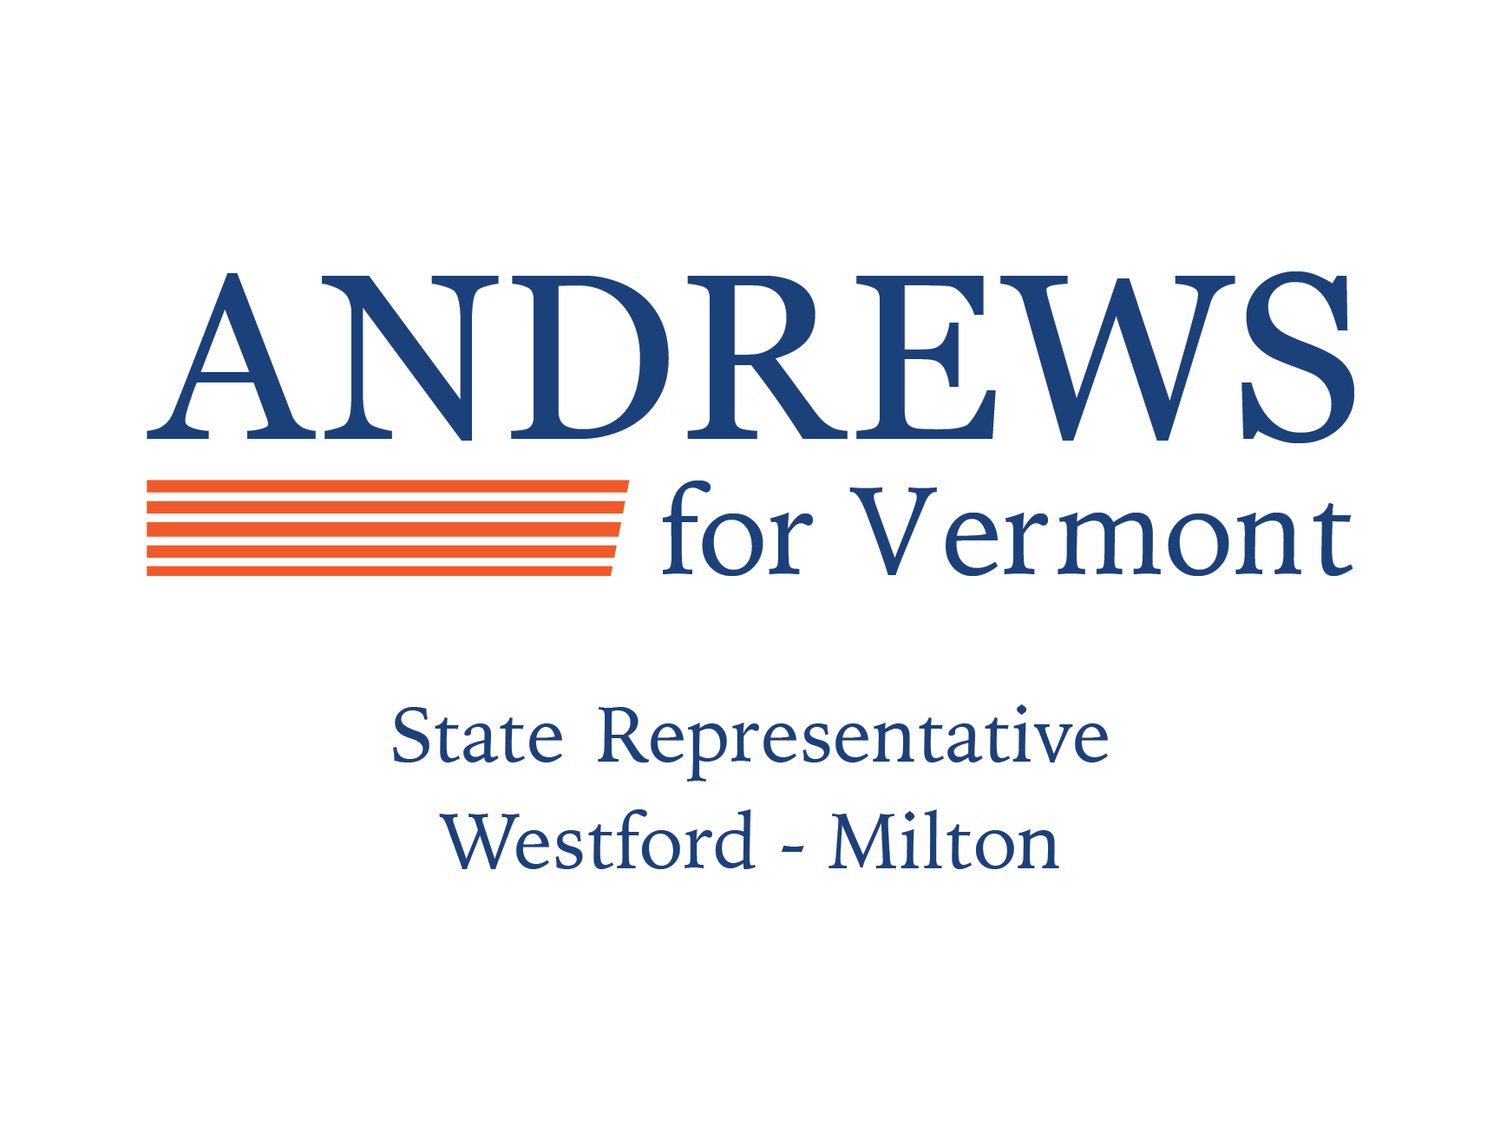 Andrews for Vermont